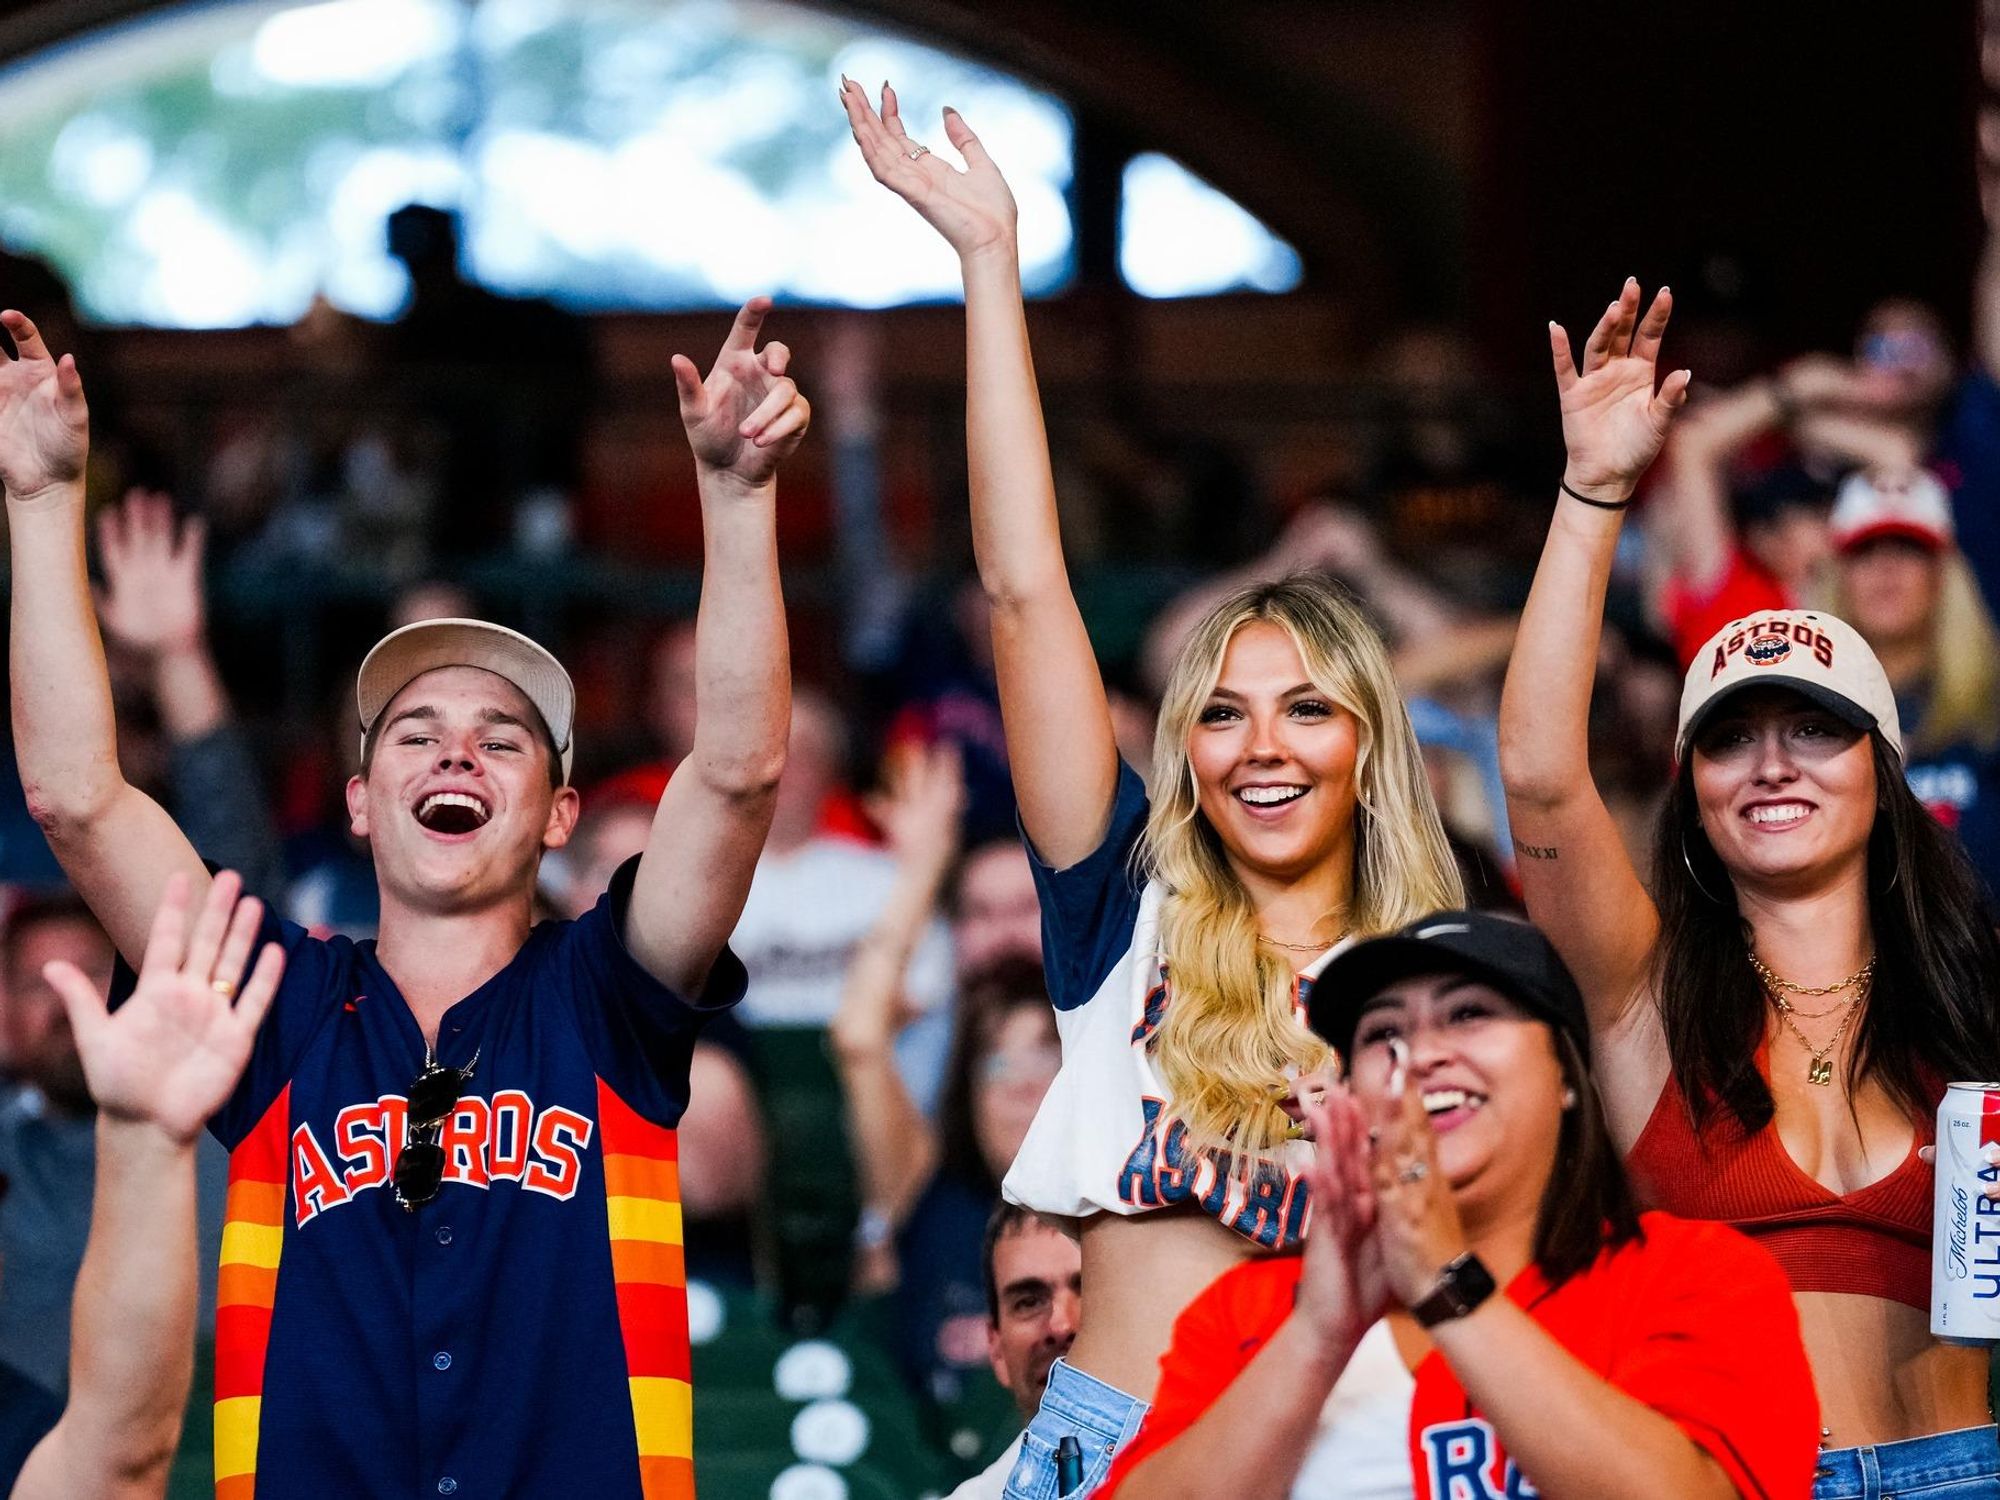 Houston Astros fans team up to return woman's hat in thrilling